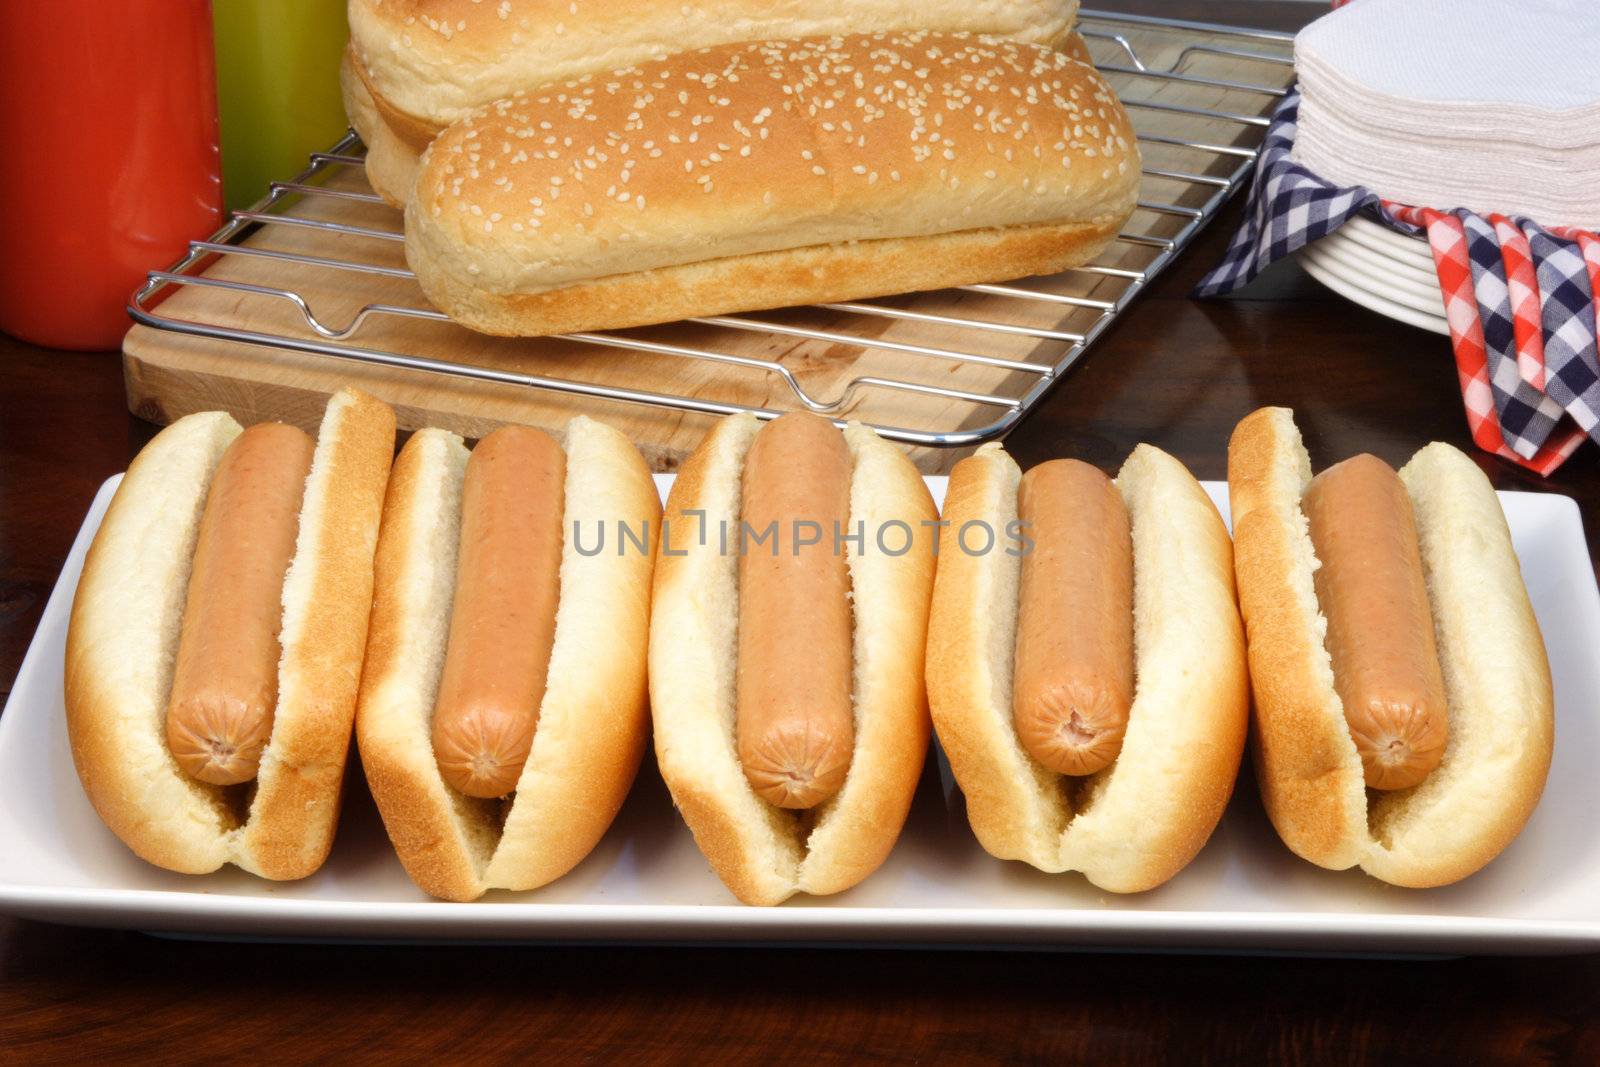 hot dog ingredients on a nice table setting rich in colors and flavors  